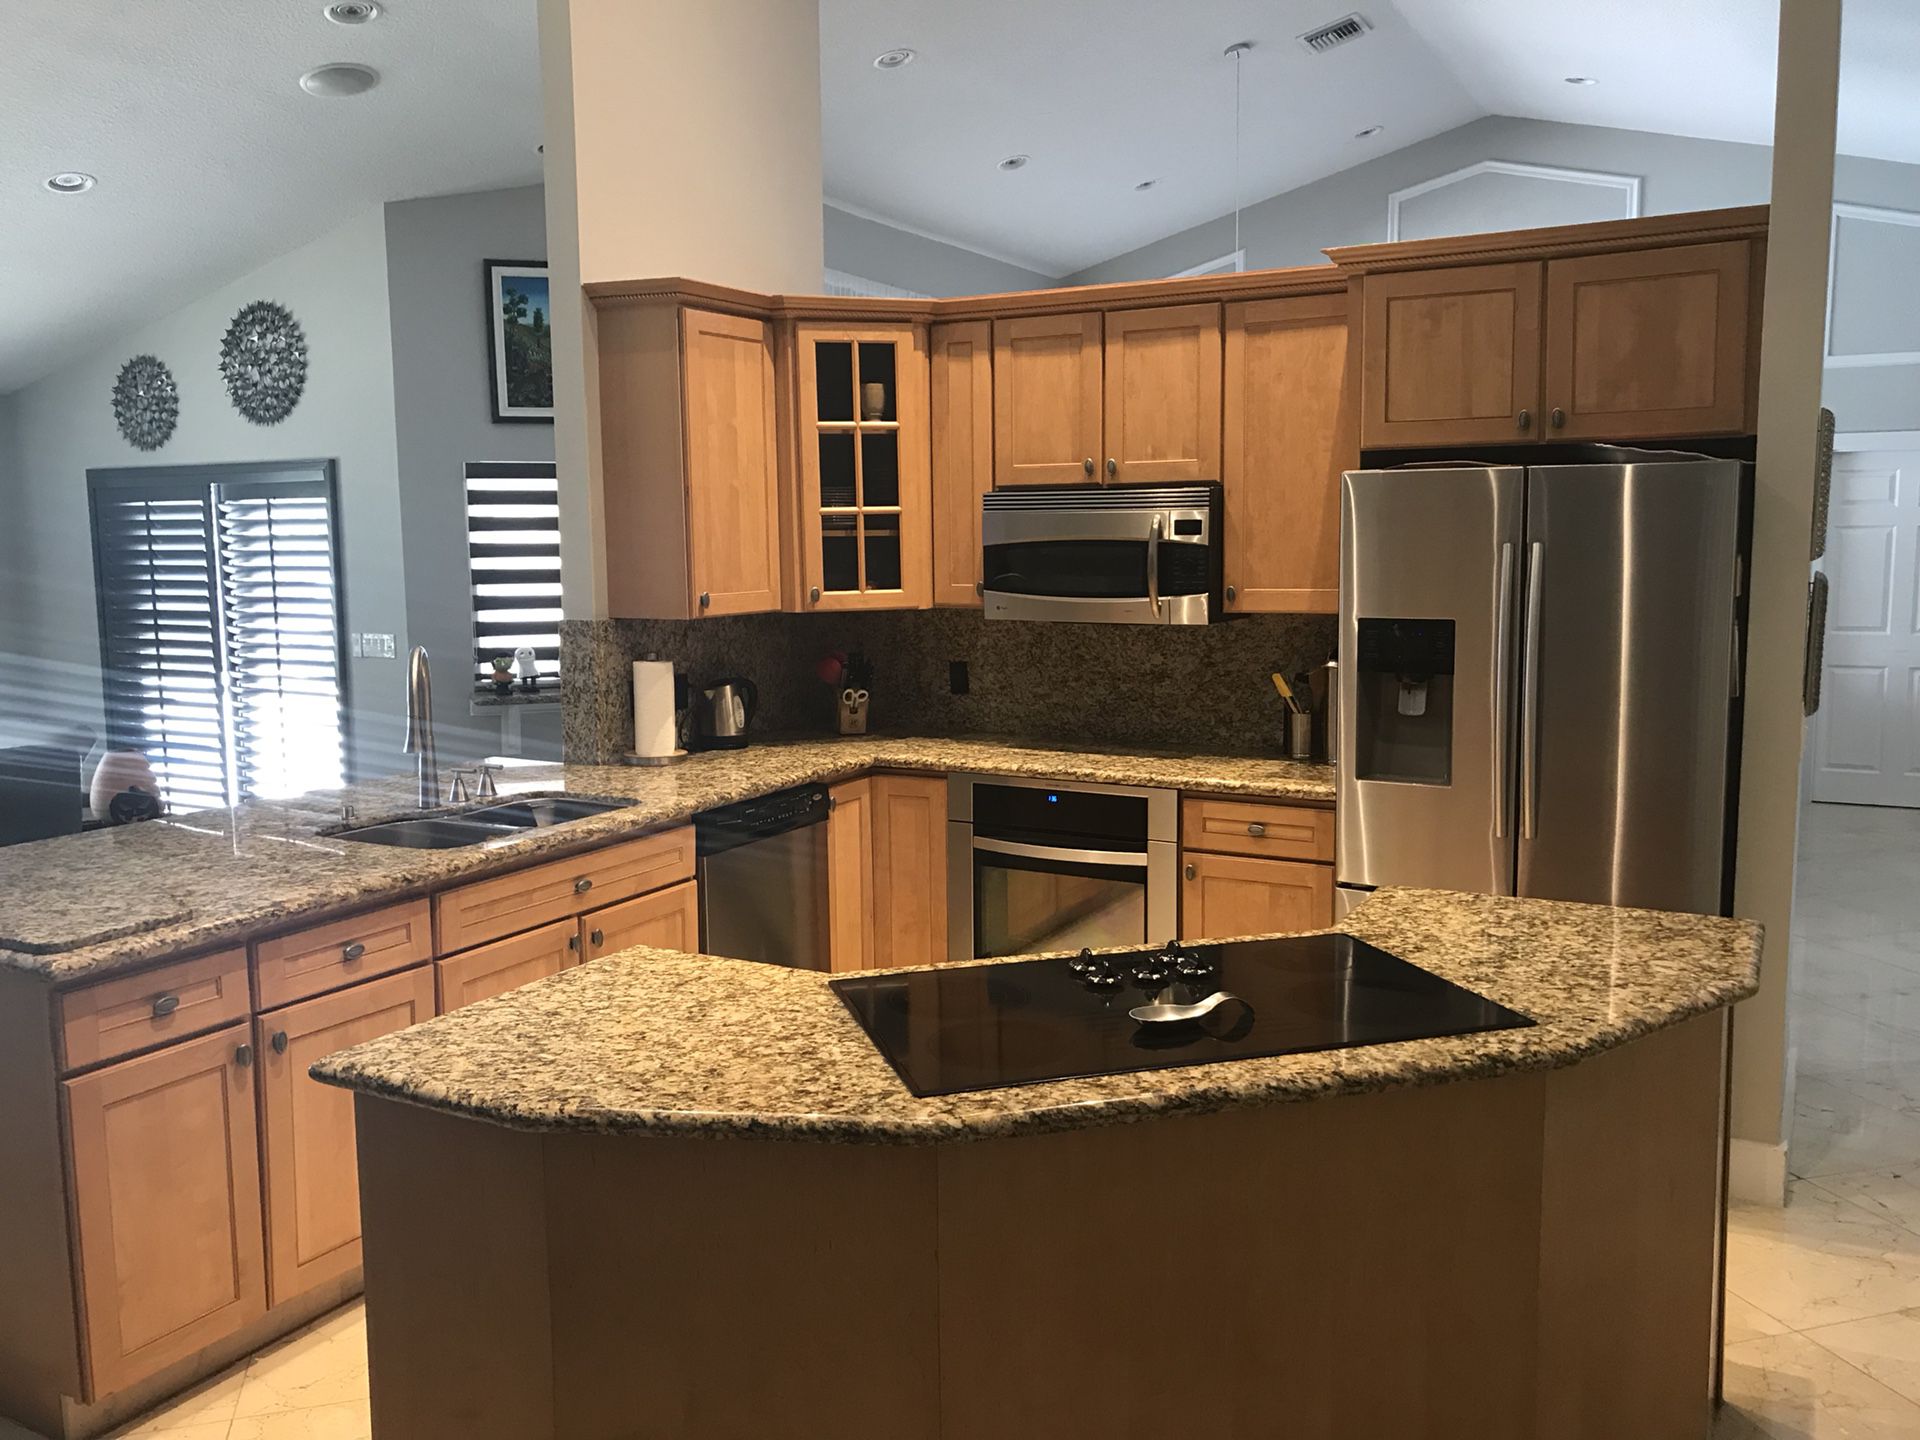 Kitchen cabinets and appliances